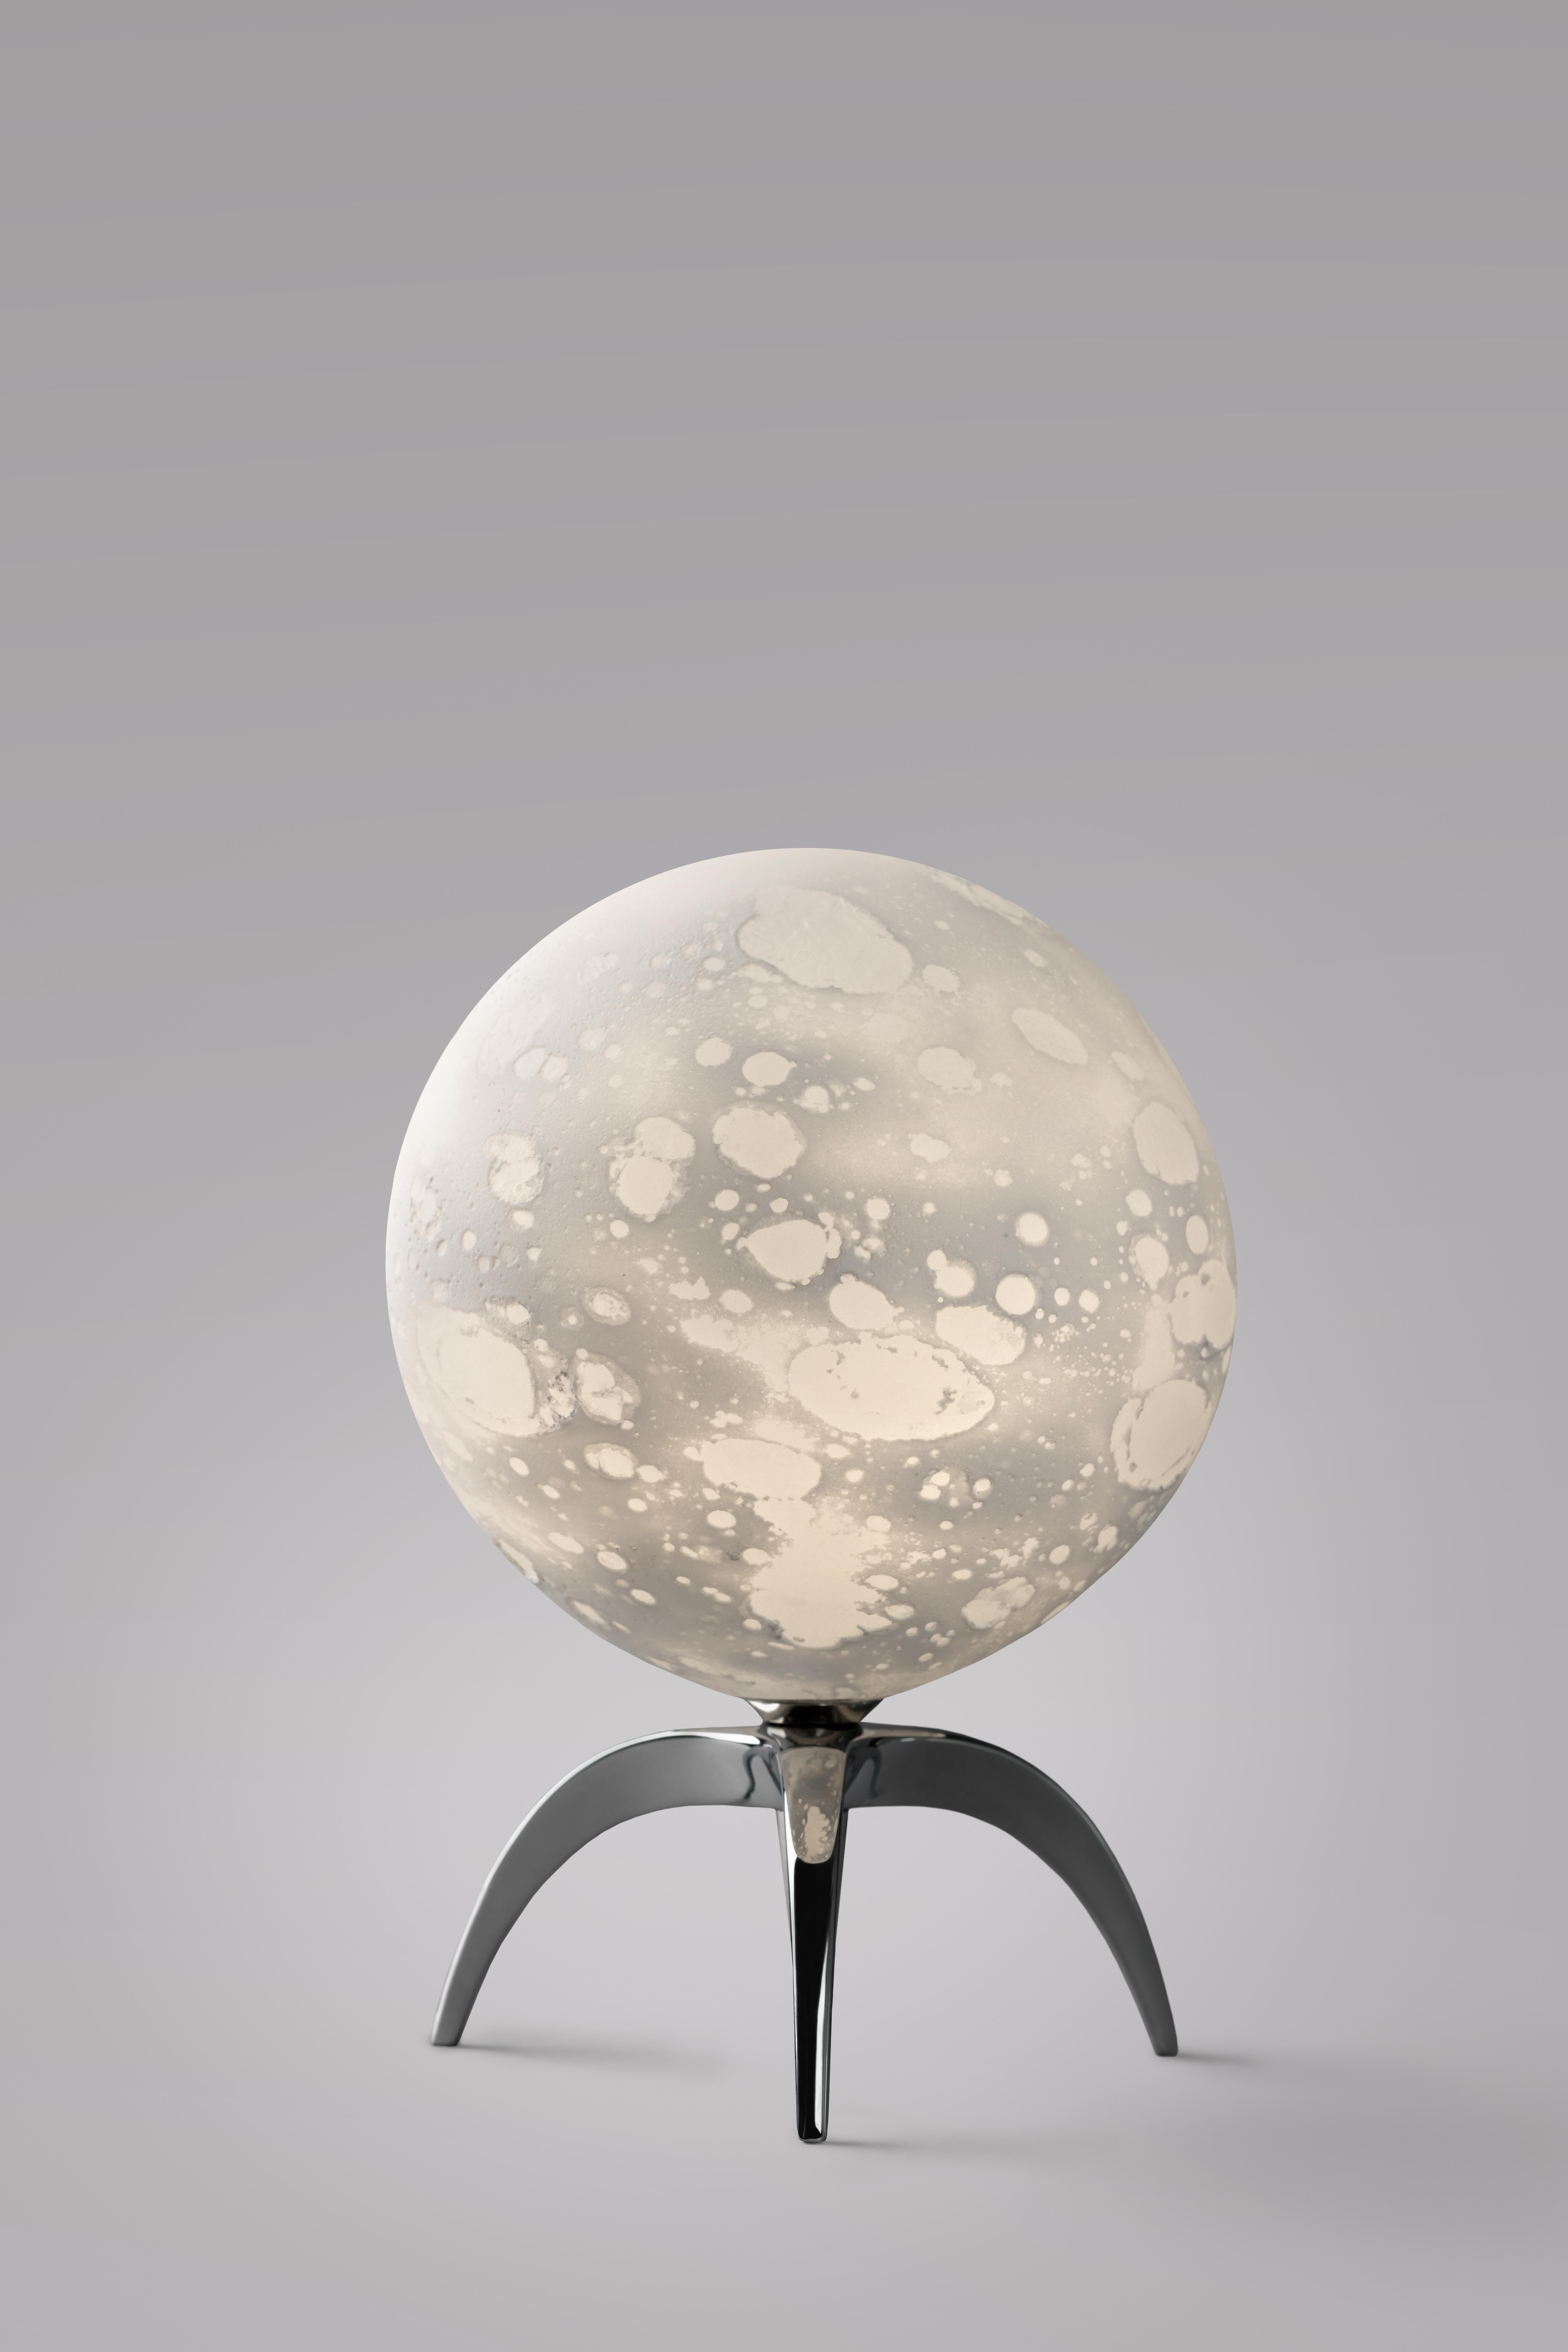 Moon sculpted table lamp, Ludovic Clément d’Armont
Blown glass and brass
Dimensions: 20 x 14 x 14 cm

Ludovic Clément d’Armont is in the continuation of a family tradition of centuries of gentle glassmakers, painters, carpenters and artists.